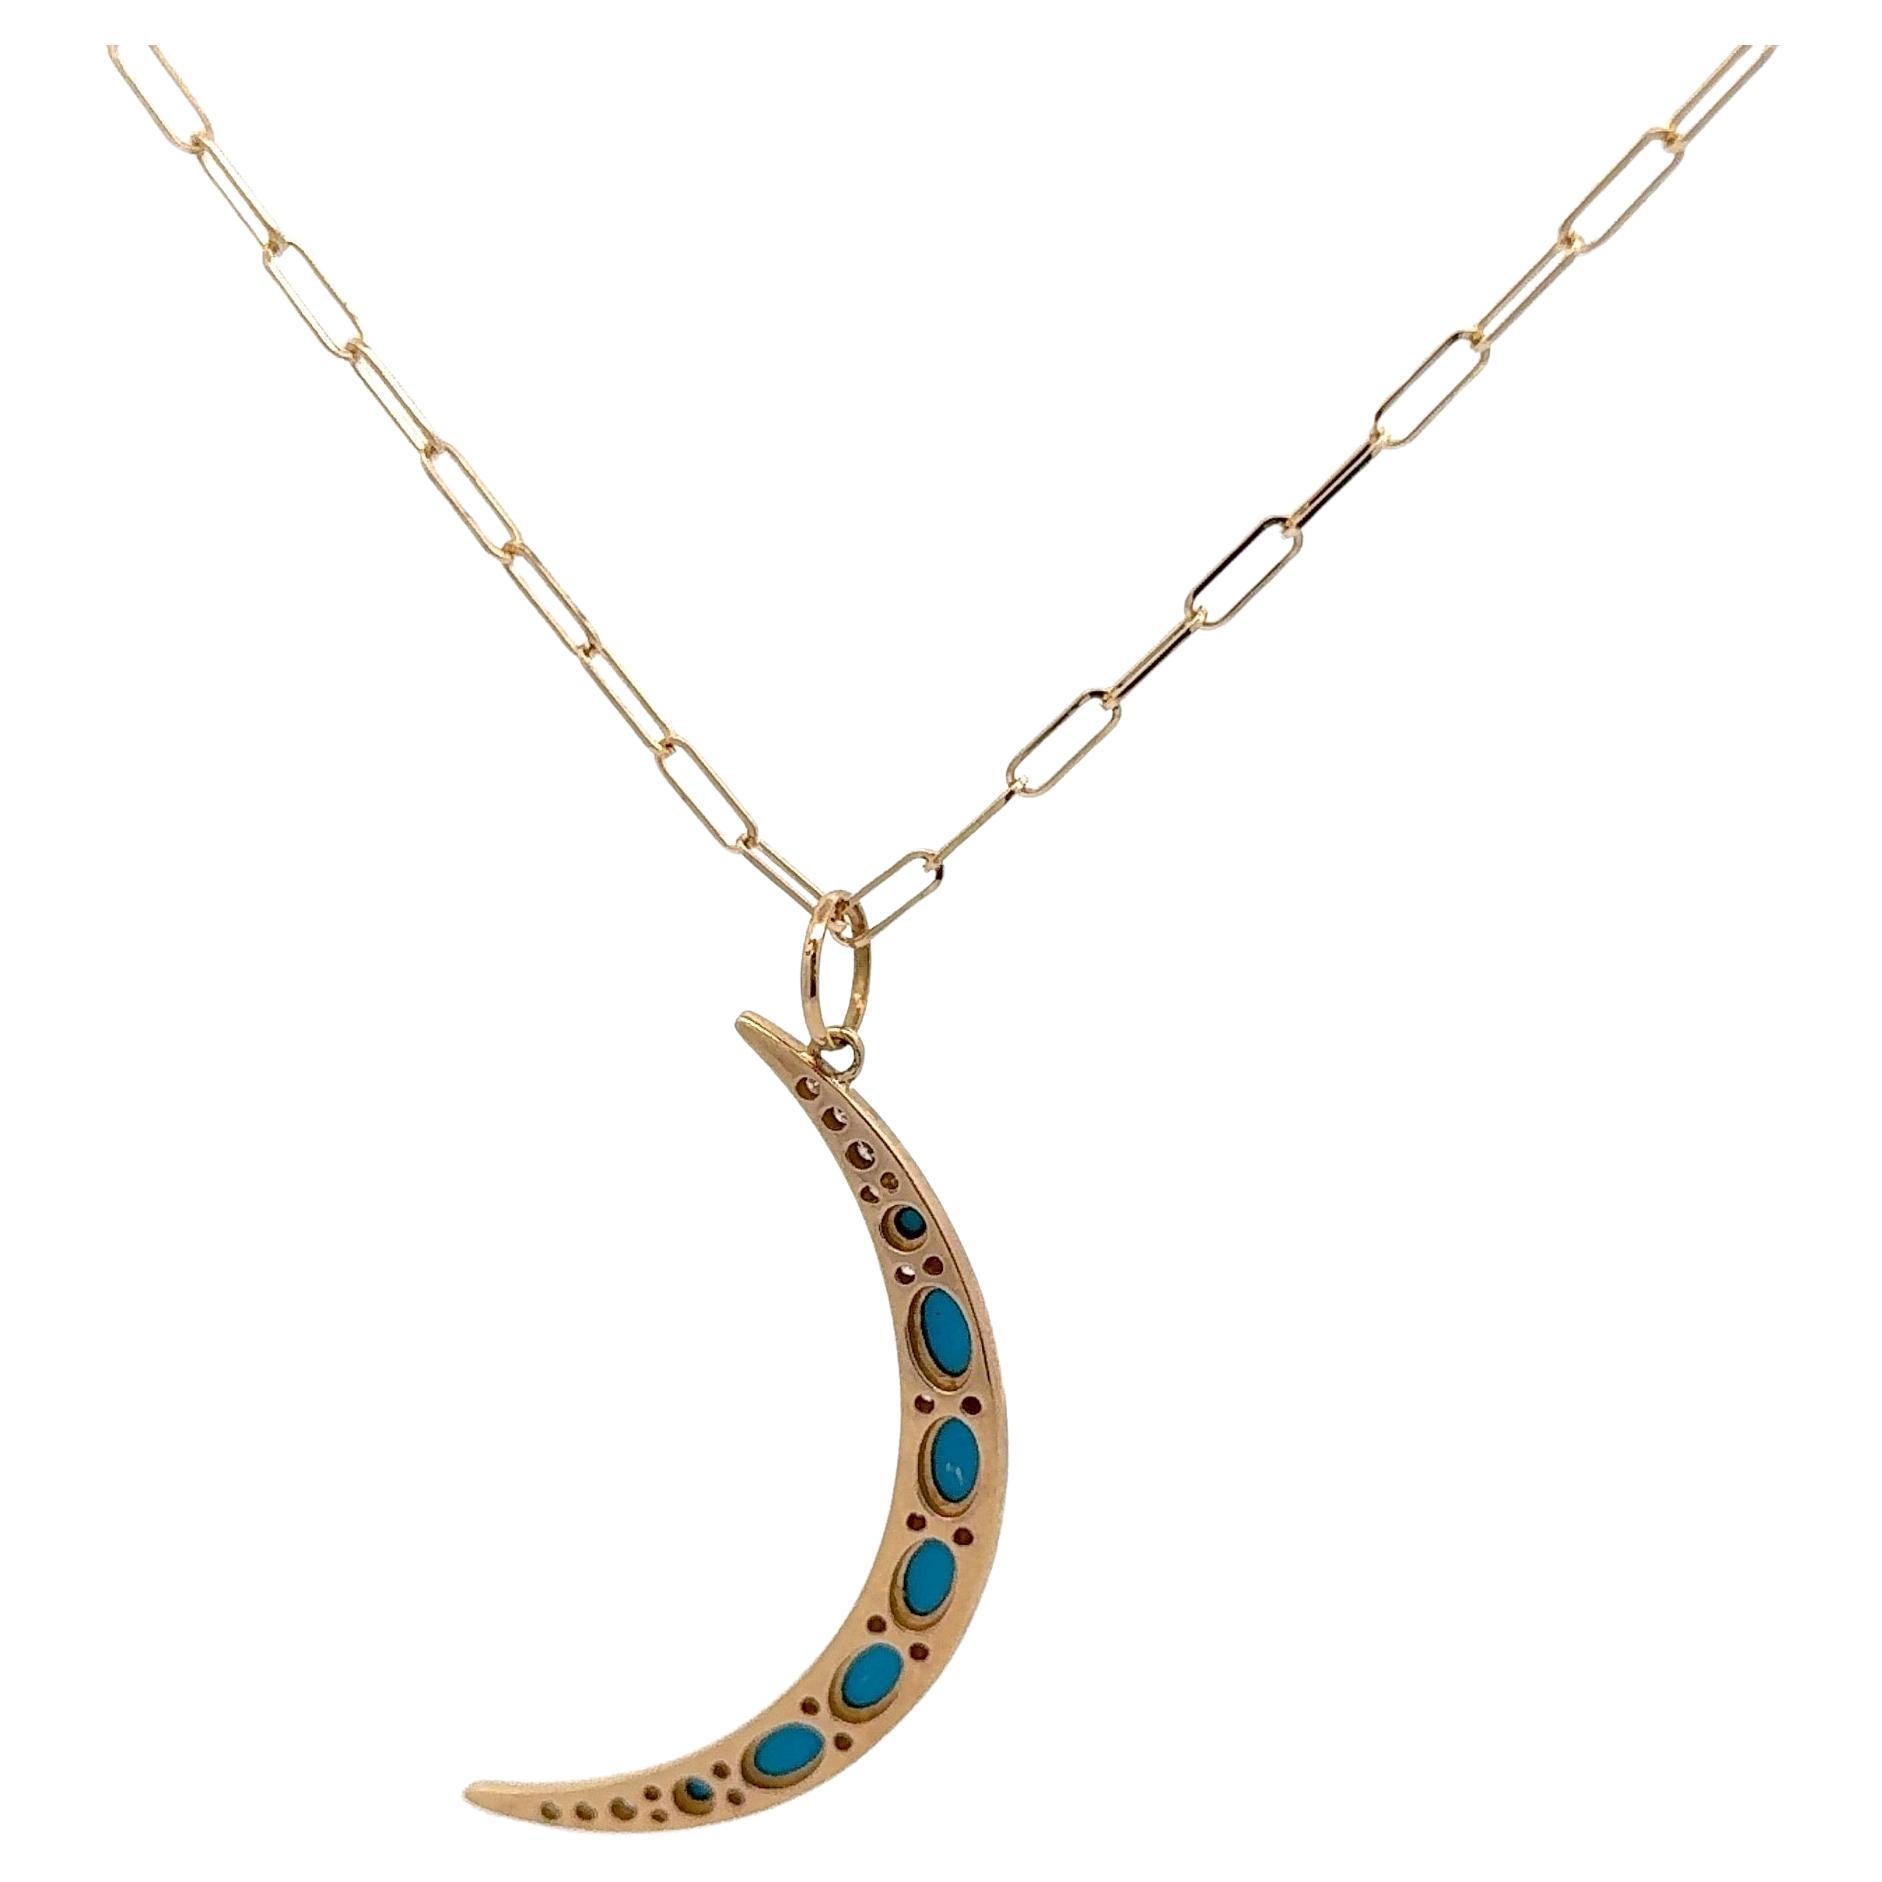 Italian made, this medium size half moon features small round brilliants and cabochon Corals on a mini paperclip link necklace, 24 inches long.
Pendant and chain can be sold separately 
DM for more info